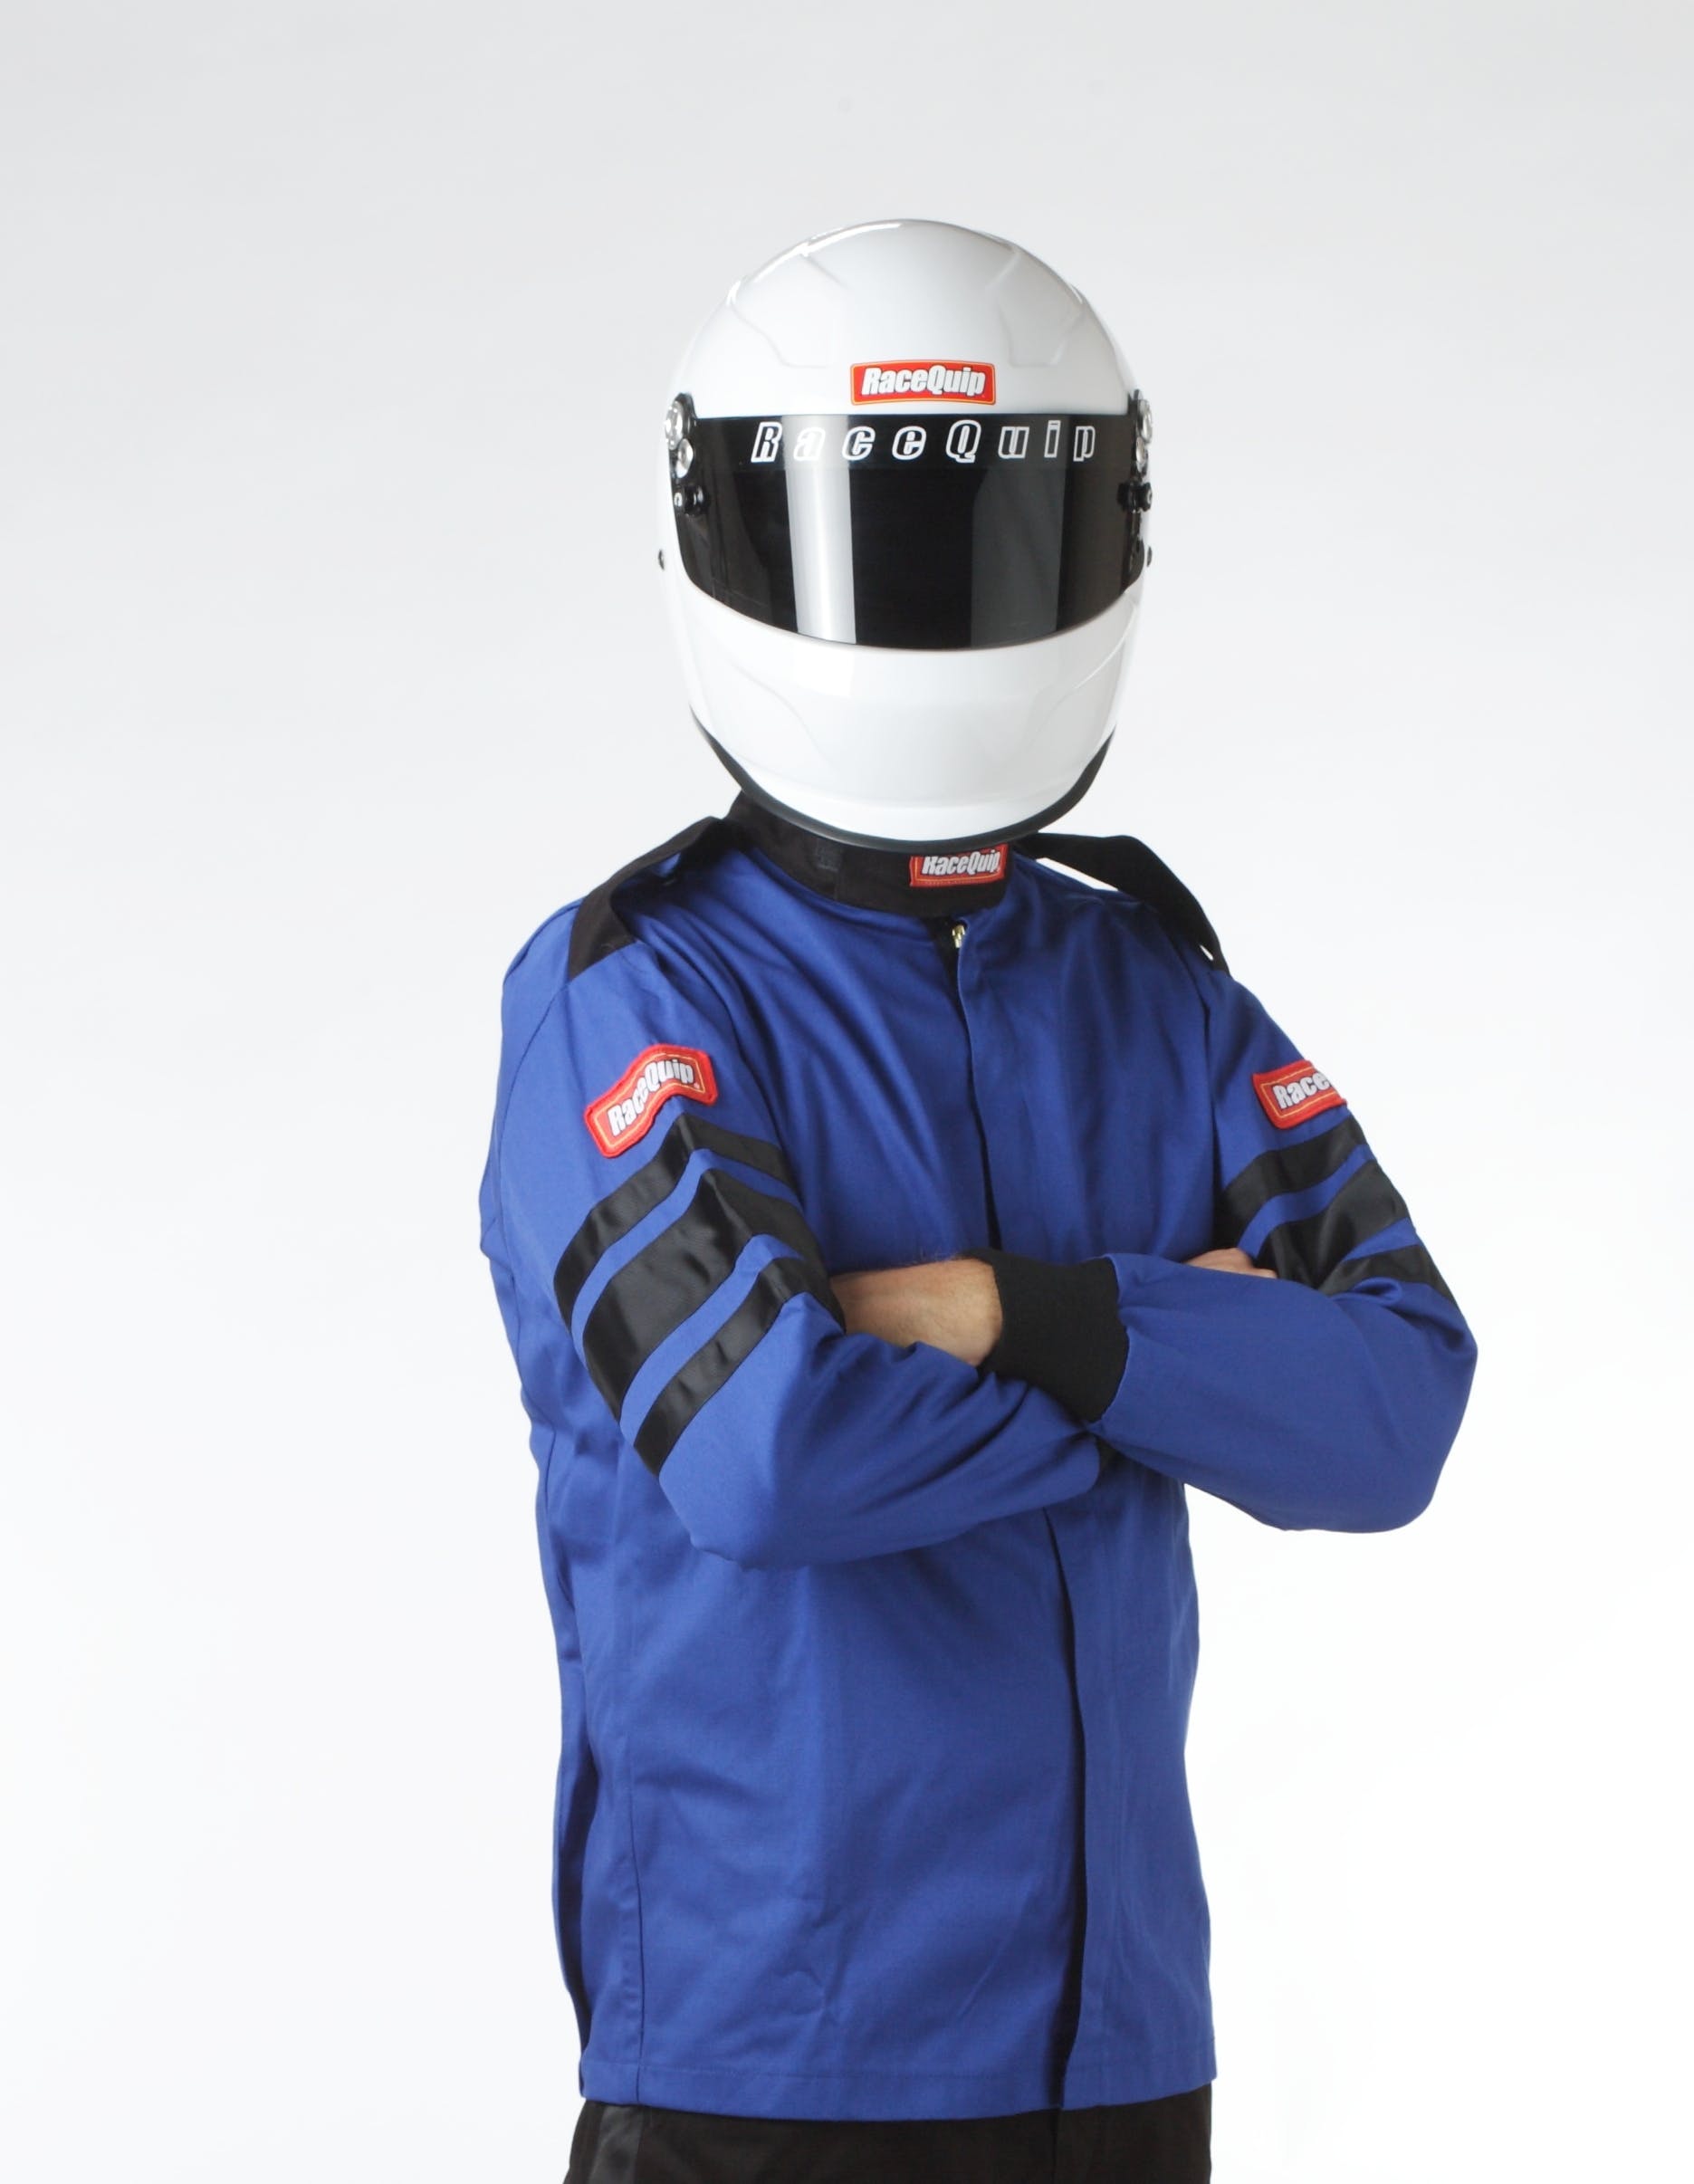 RaceQuip 111028 SFI-1 Pyrovatex Single-Layer Racing Fire Jacket (Blue, 3X-Large)